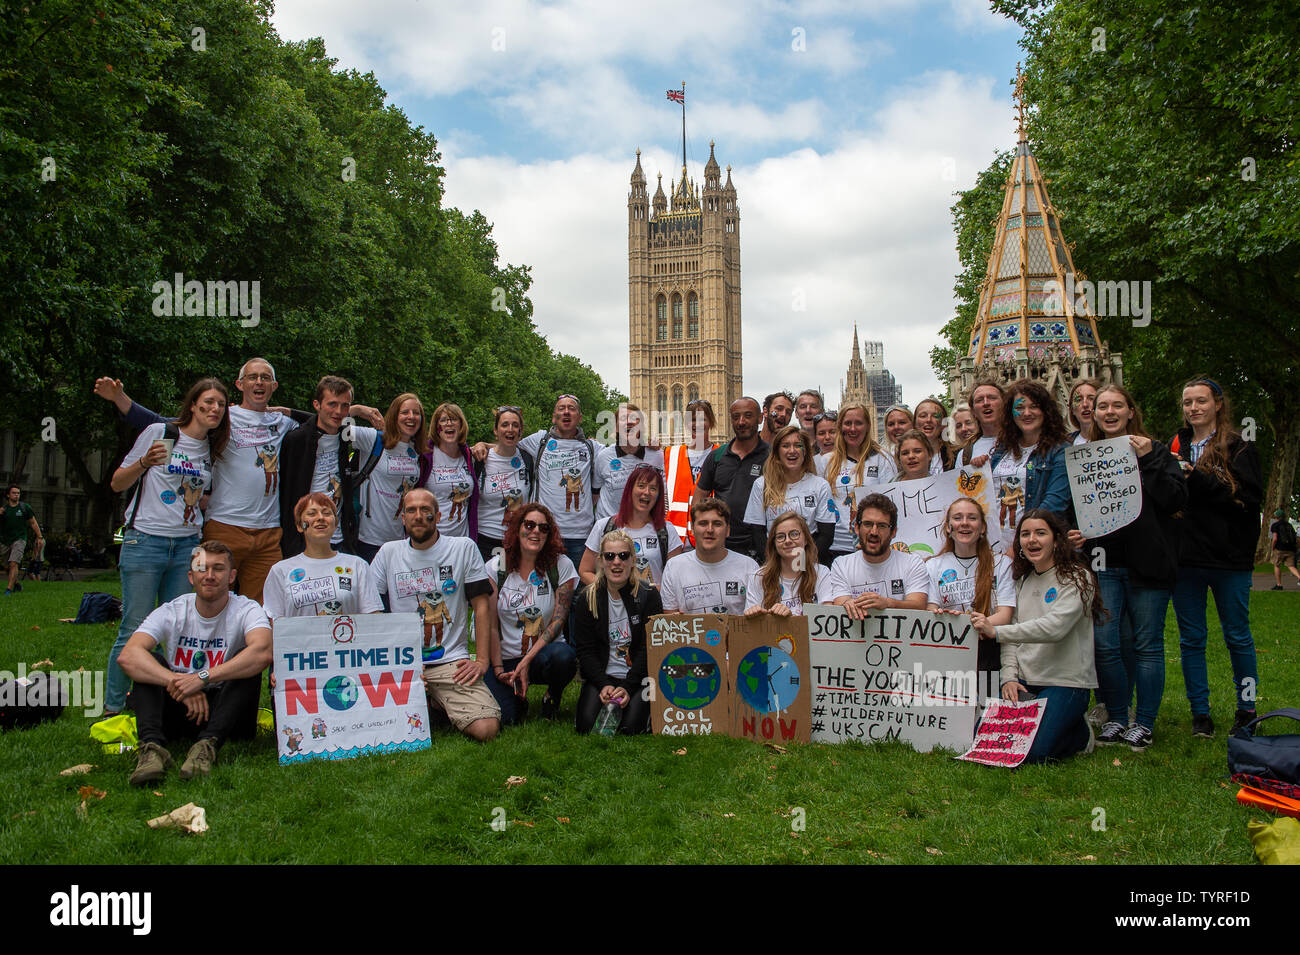 Victoria Tower Gardens, Westminster, London, UK. 26th June, 2019. Protestors pose for a photograph after the Time is Now Lobby. This was a mass lobby for climate, nature and people held around the streets in Westminster. Credit: Maureen McLean/Alamy Stock Photo